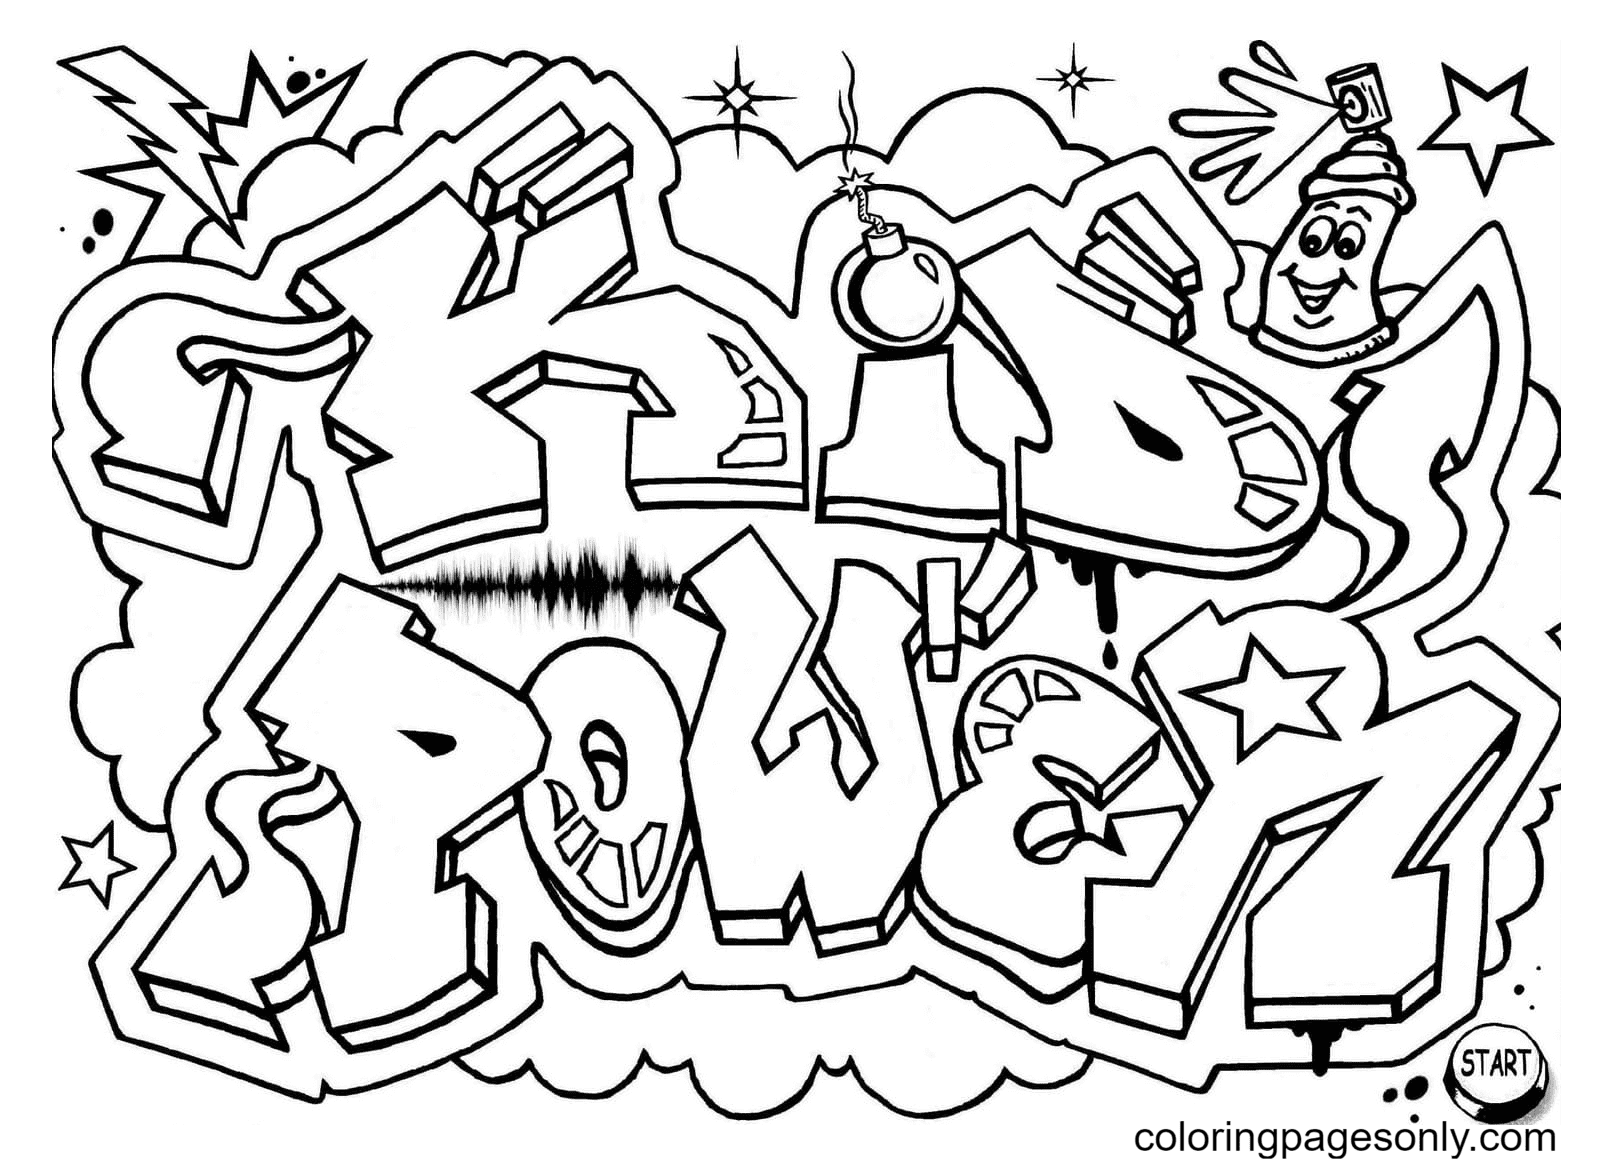 Kid power Coloring Page